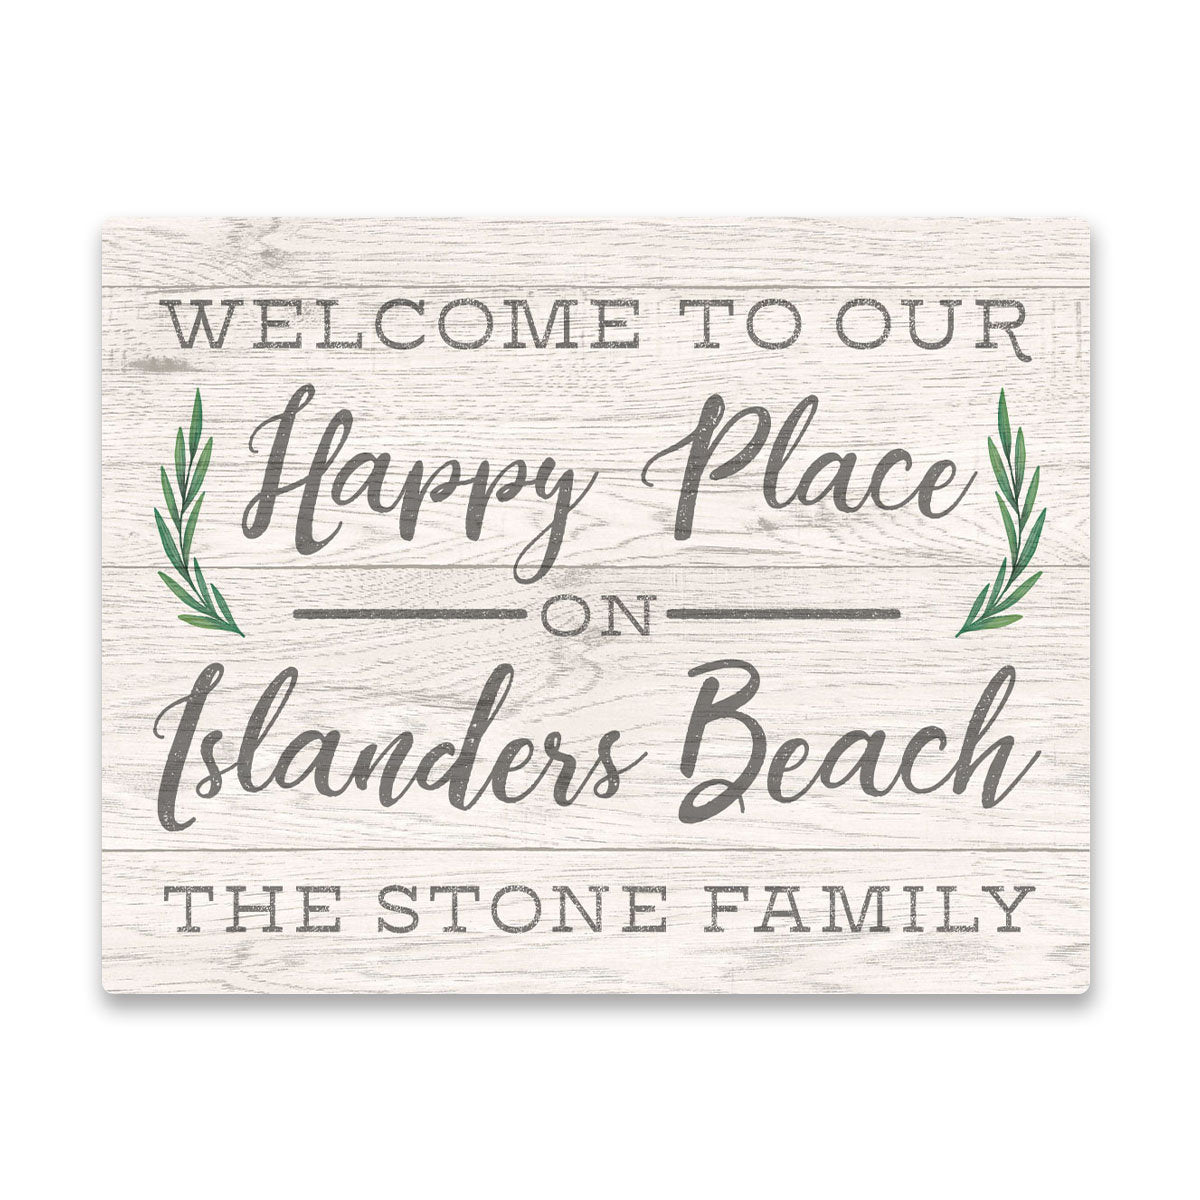 Personalized Welcome to Our Happy Place On Islanders Beach Wall Art